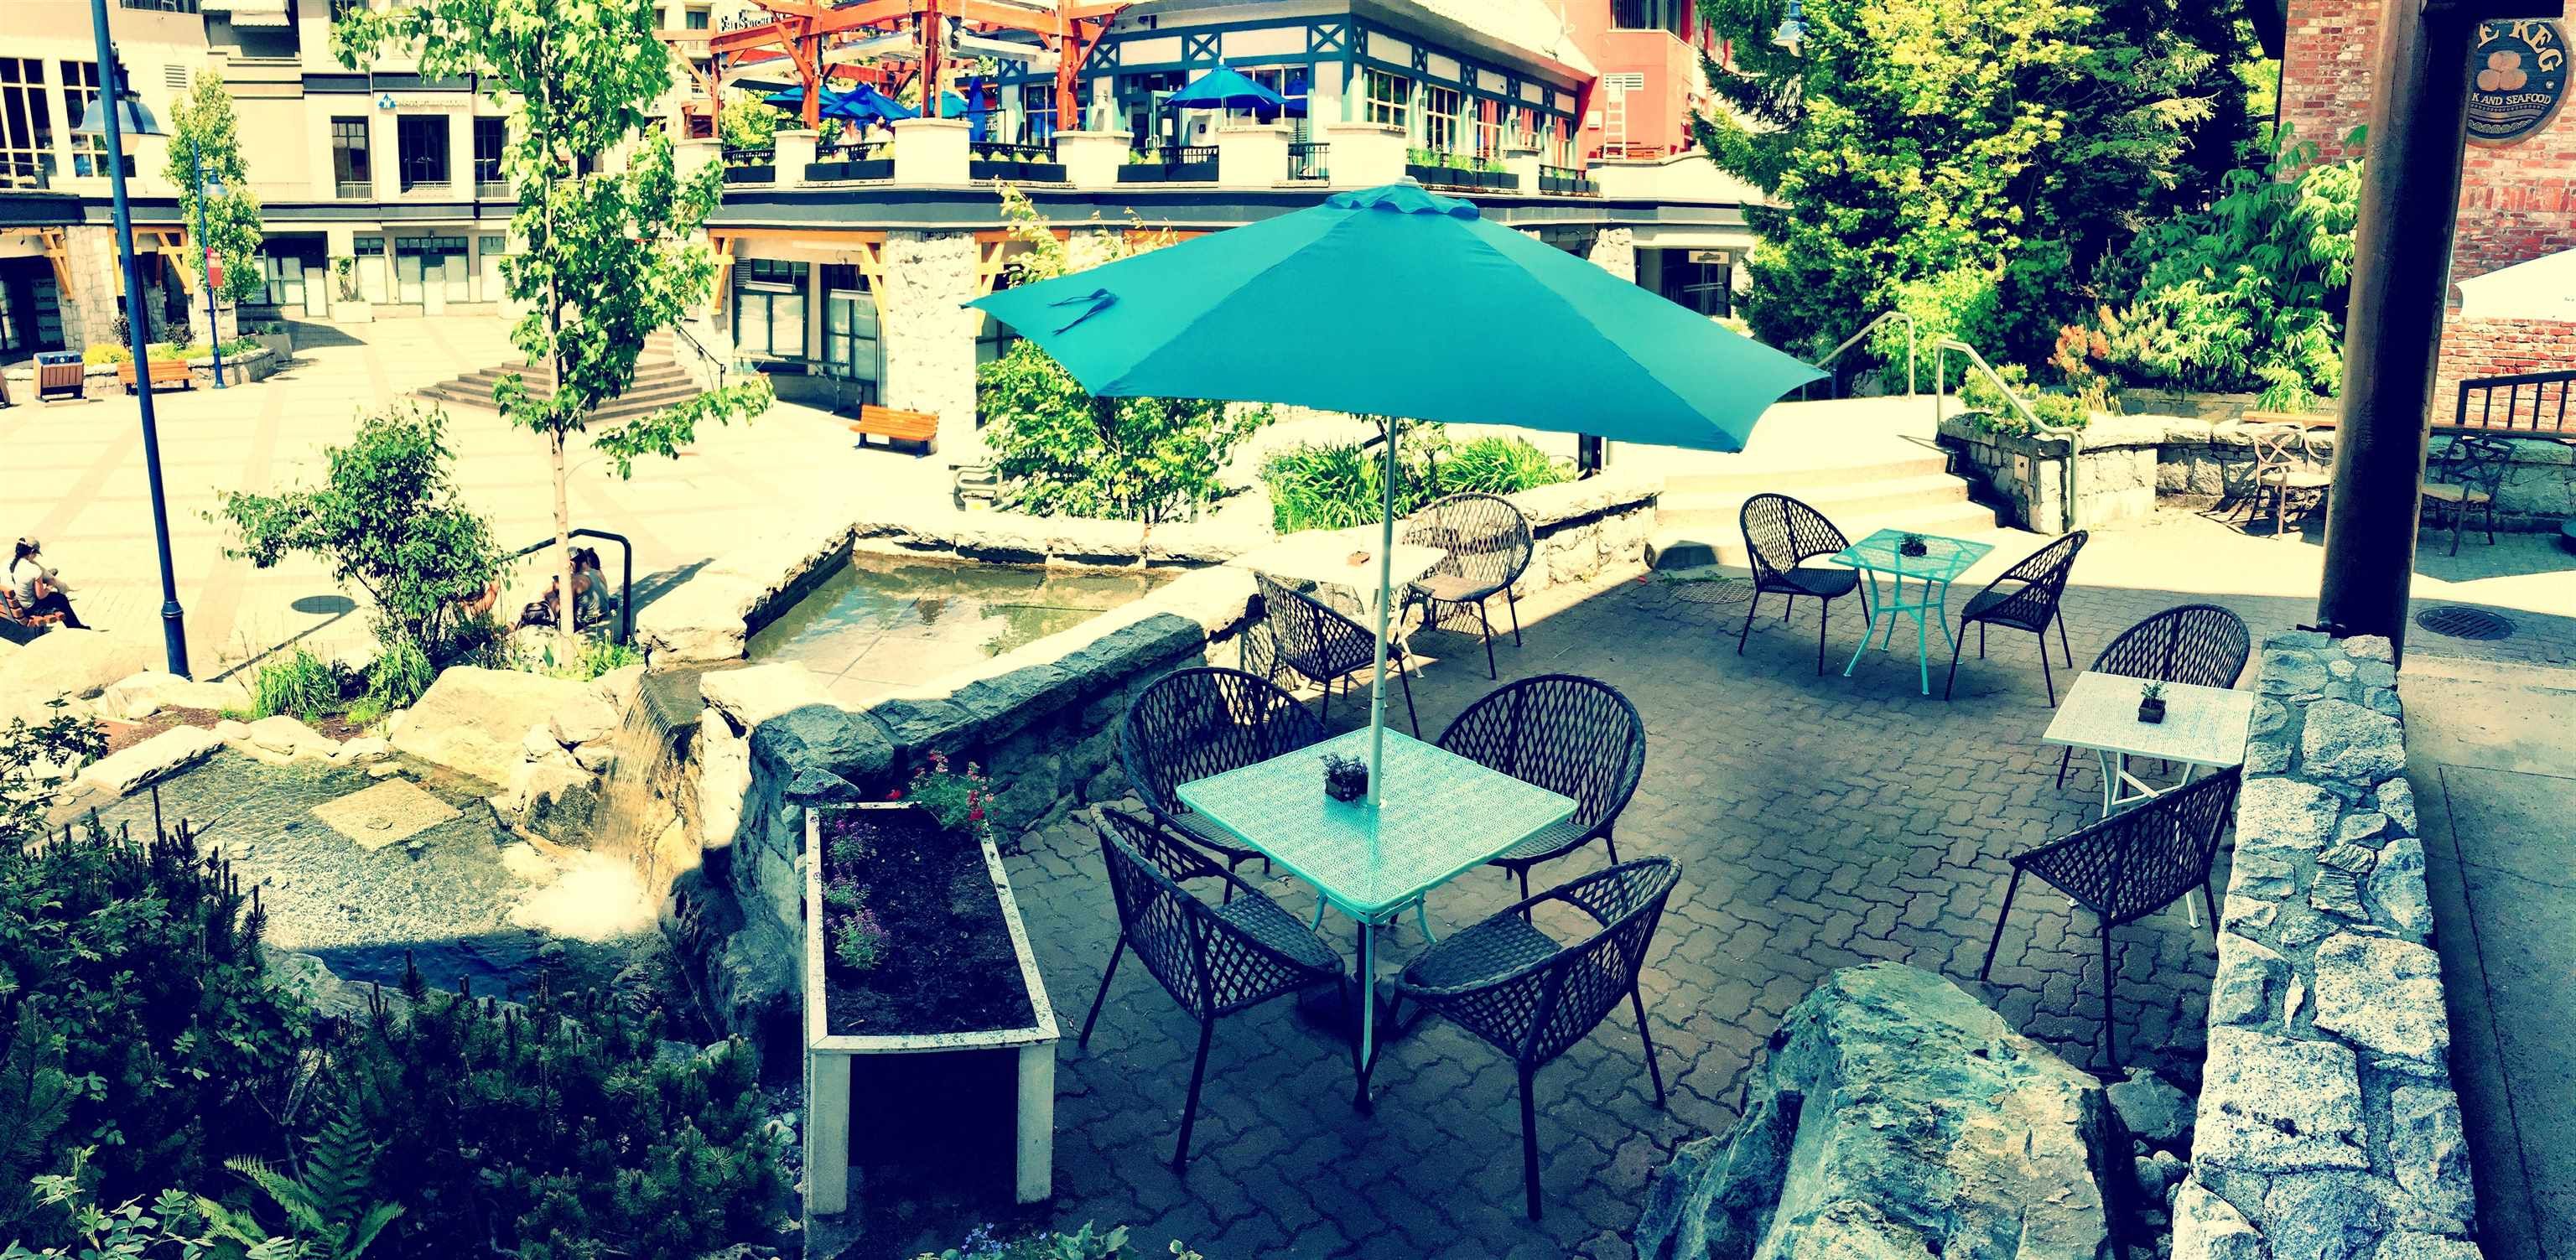 Main Photo: 1 4433 SUNDIAL Place in Whistler: Whistler Village Business for sale : MLS®# C8041286